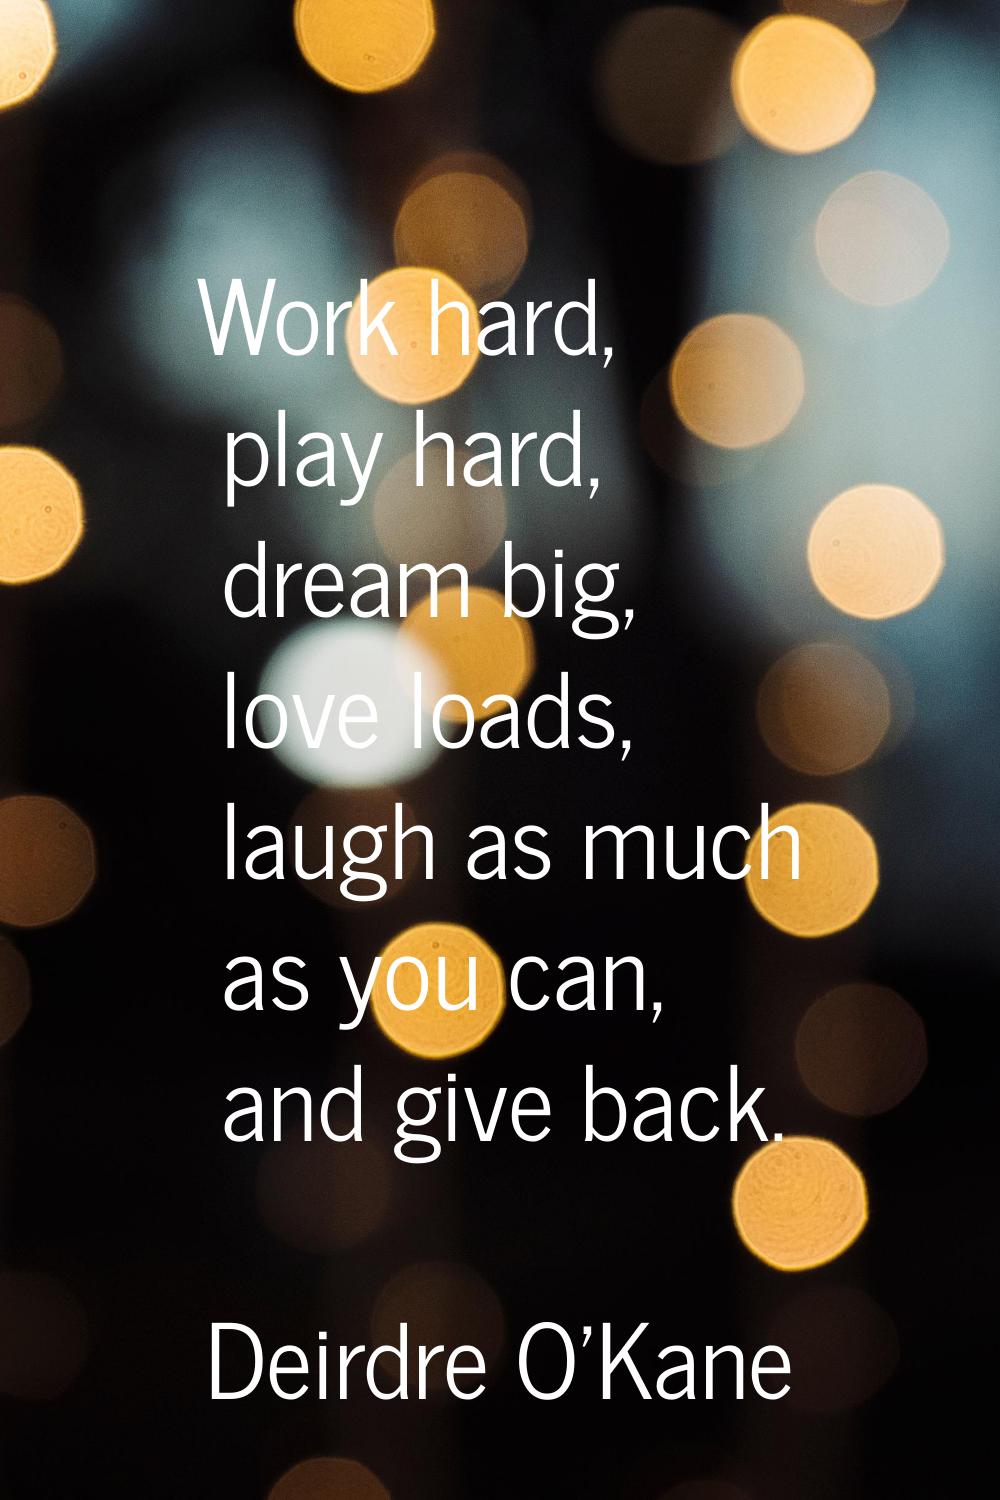 Work hard, play hard, dream big, love loads, laugh as much as you can, and give back.